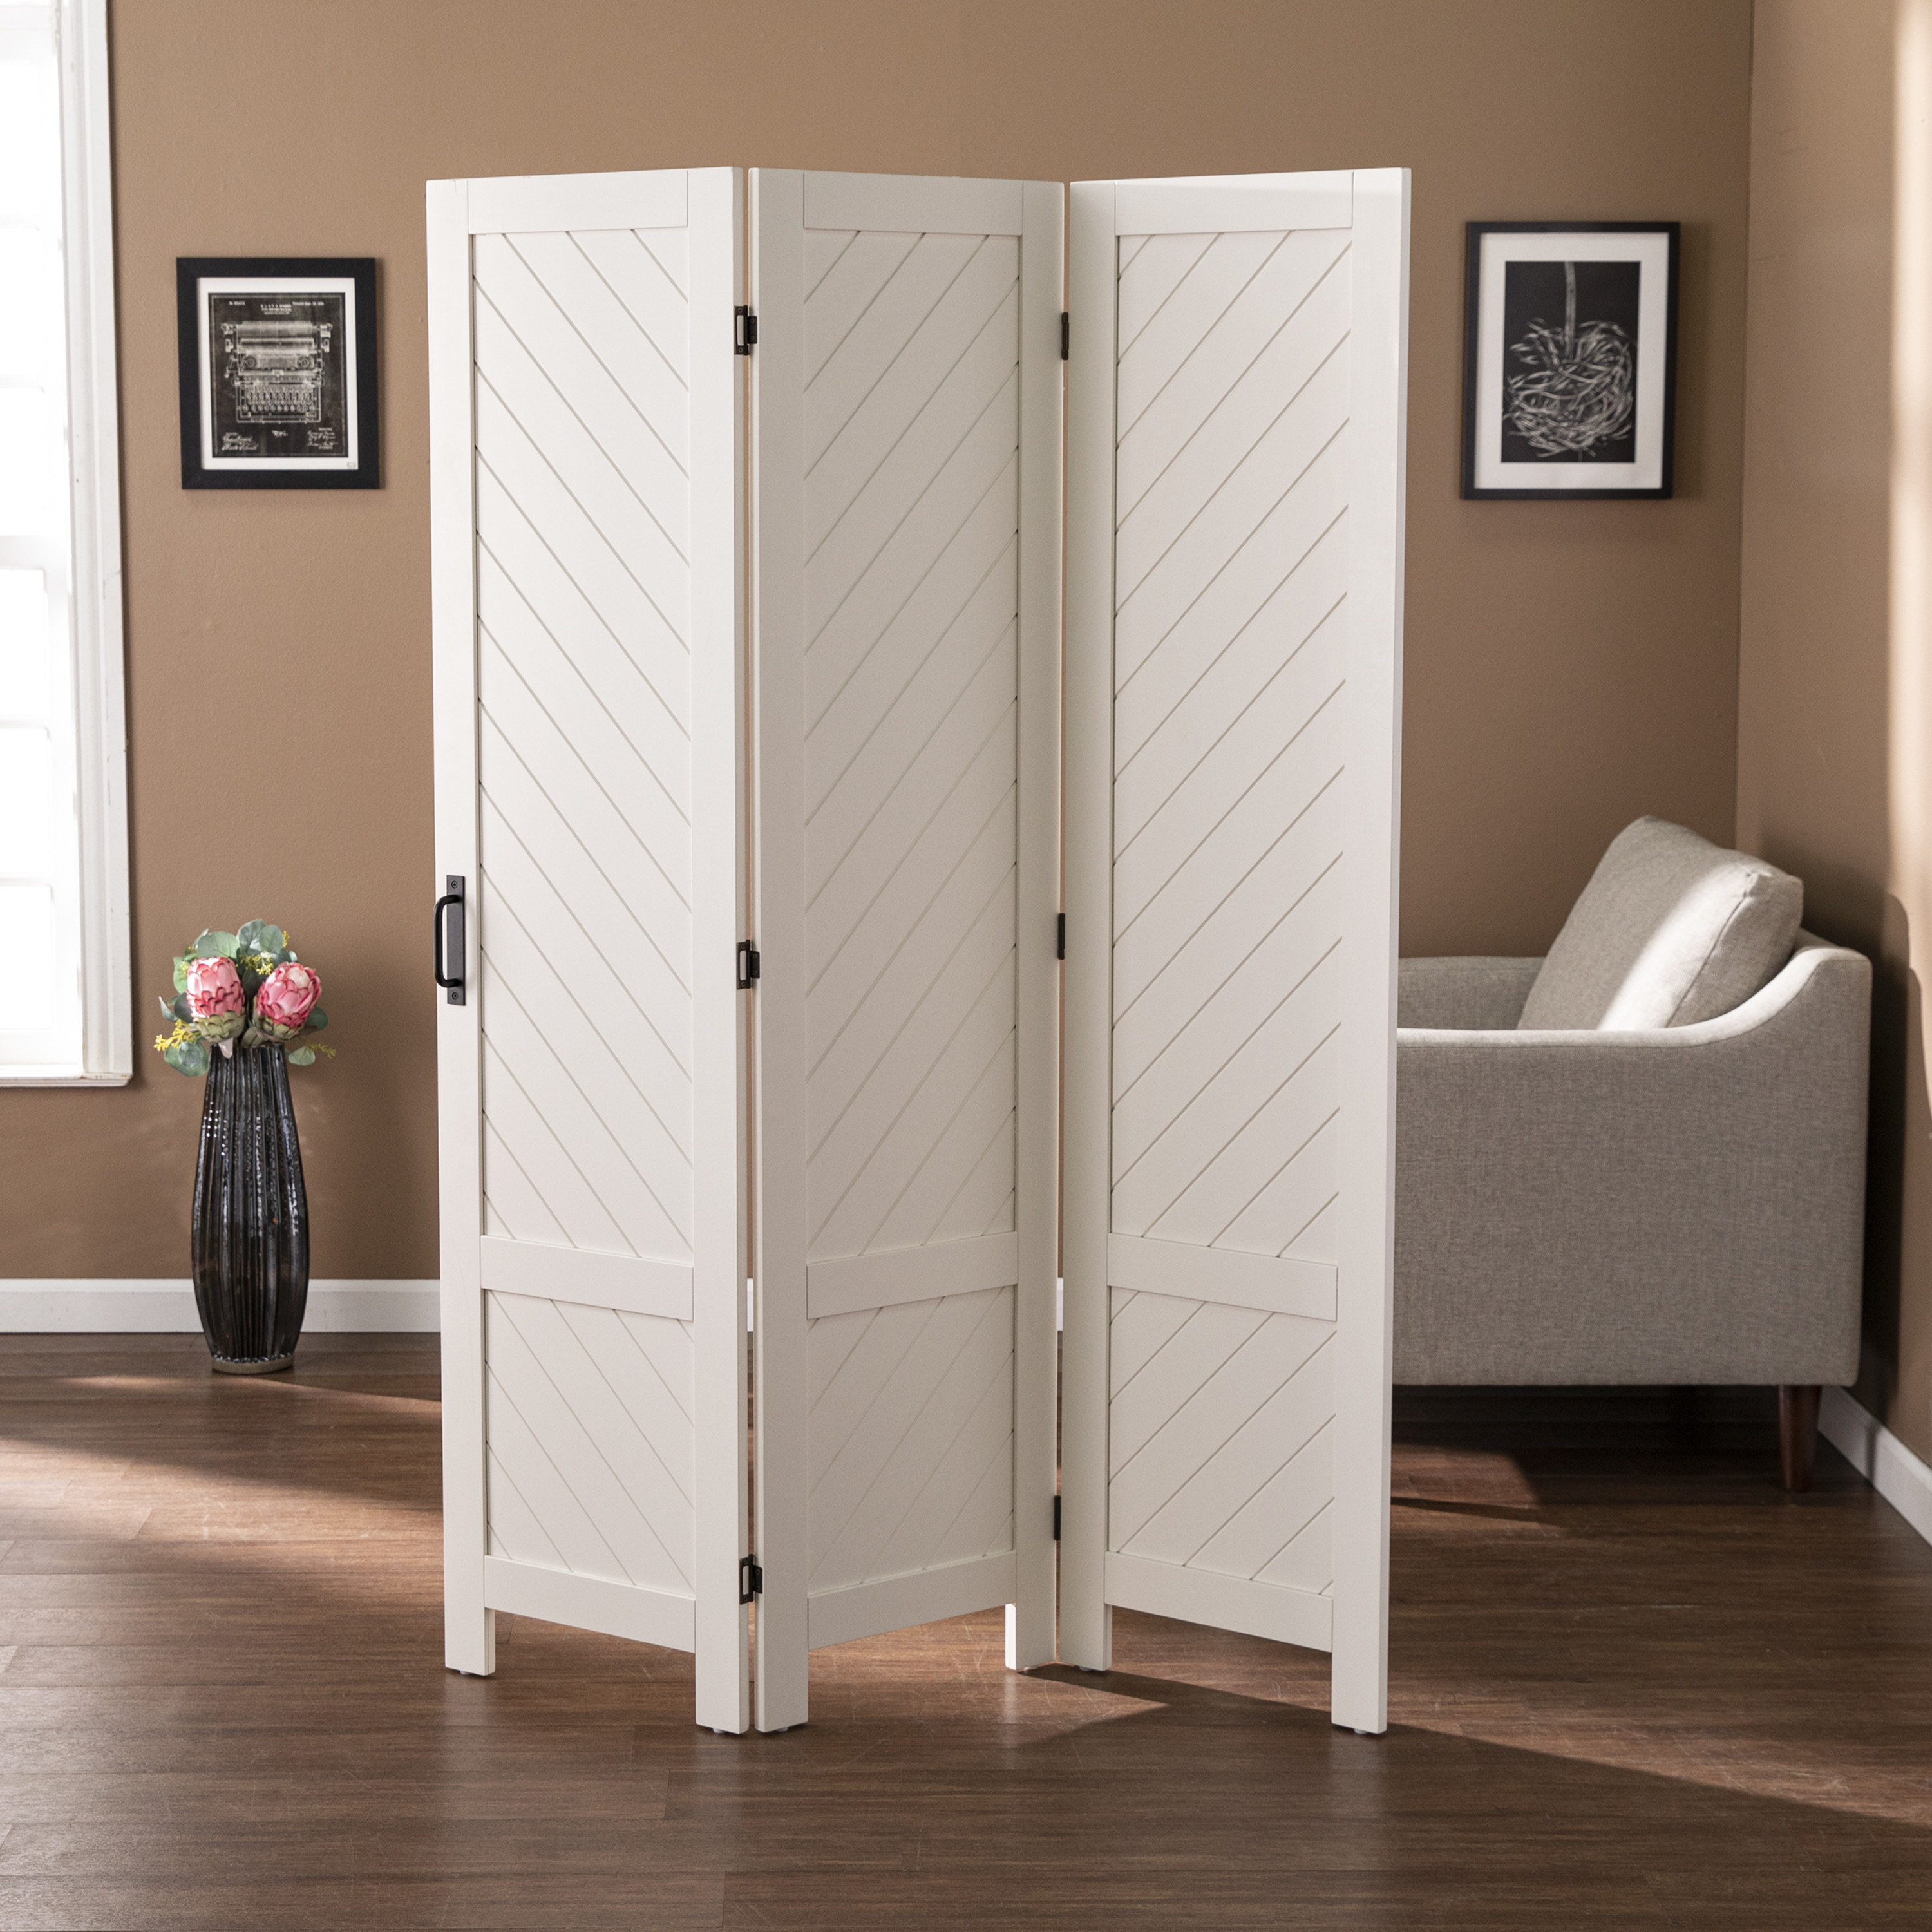 Southern Enterprises Trileigh Modern Farmhouse Style 3-Panel Room Divider in White finish - image 1 of 7